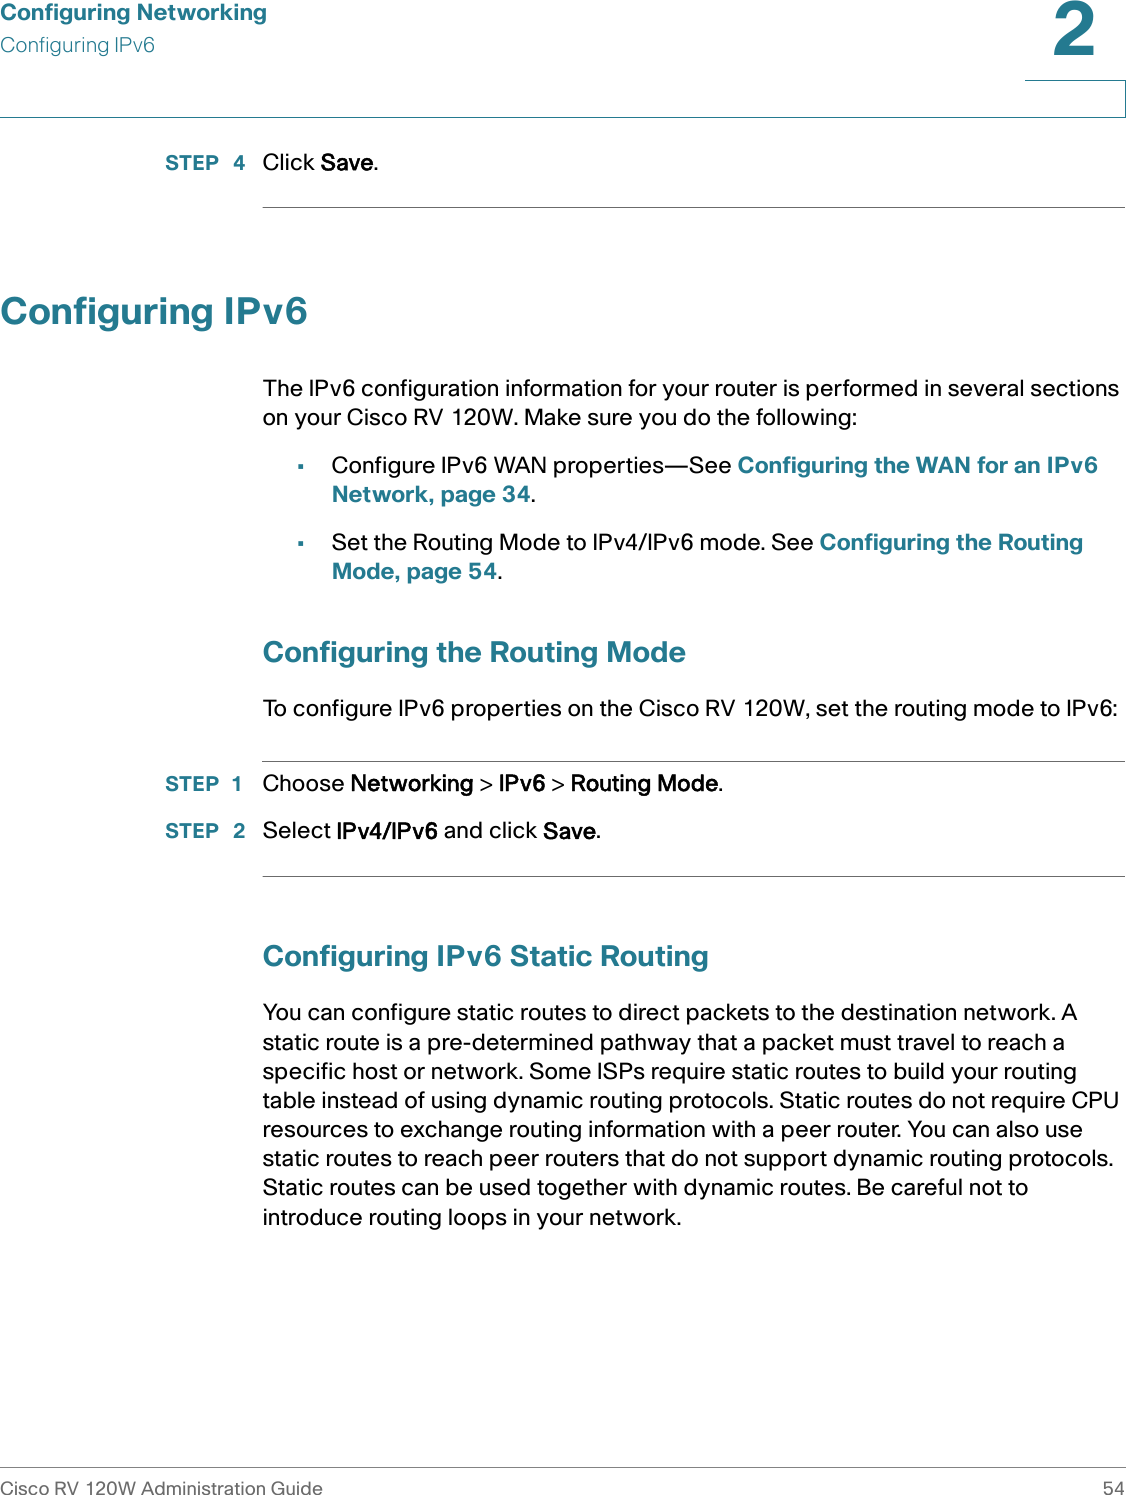 Configuring NetworkingConfiguring IPv6Cisco RV 120W Administration Guide 542 STEP  4 Click Save.Configuring IPv6The IPv6 configuration information for your router is performed in several sections on your Cisco RV 120W. Make sure you do the following:•Configure IPv6 WAN properties—See Configuring the WAN for an IPv6 Network, page 34.•Set the Routing Mode to IPv4/IPv6 mode. See Configuring the Routing Mode, page 54.Configuring the Routing ModeTo configure IPv6 properties on the Cisco RV 120W, set the routing mode to IPv6:STEP 1 Choose Networking &gt; IPv6 &gt; Routing Mode.STEP  2 Select IPv4/IPv6 and click Save.Configuring IPv6 Static RoutingYou can configure static routes to direct packets to the destination network. A static route is a pre-determined pathway that a packet must travel to reach a specific host or network. Some ISPs require static routes to build your routing table instead of using dynamic routing protocols. Static routes do not require CPU resources to exchange routing information with a peer router. You can also use static routes to reach peer routers that do not support dynamic routing protocols. Static routes can be used together with dynamic routes. Be careful not to introduce routing loops in your network.